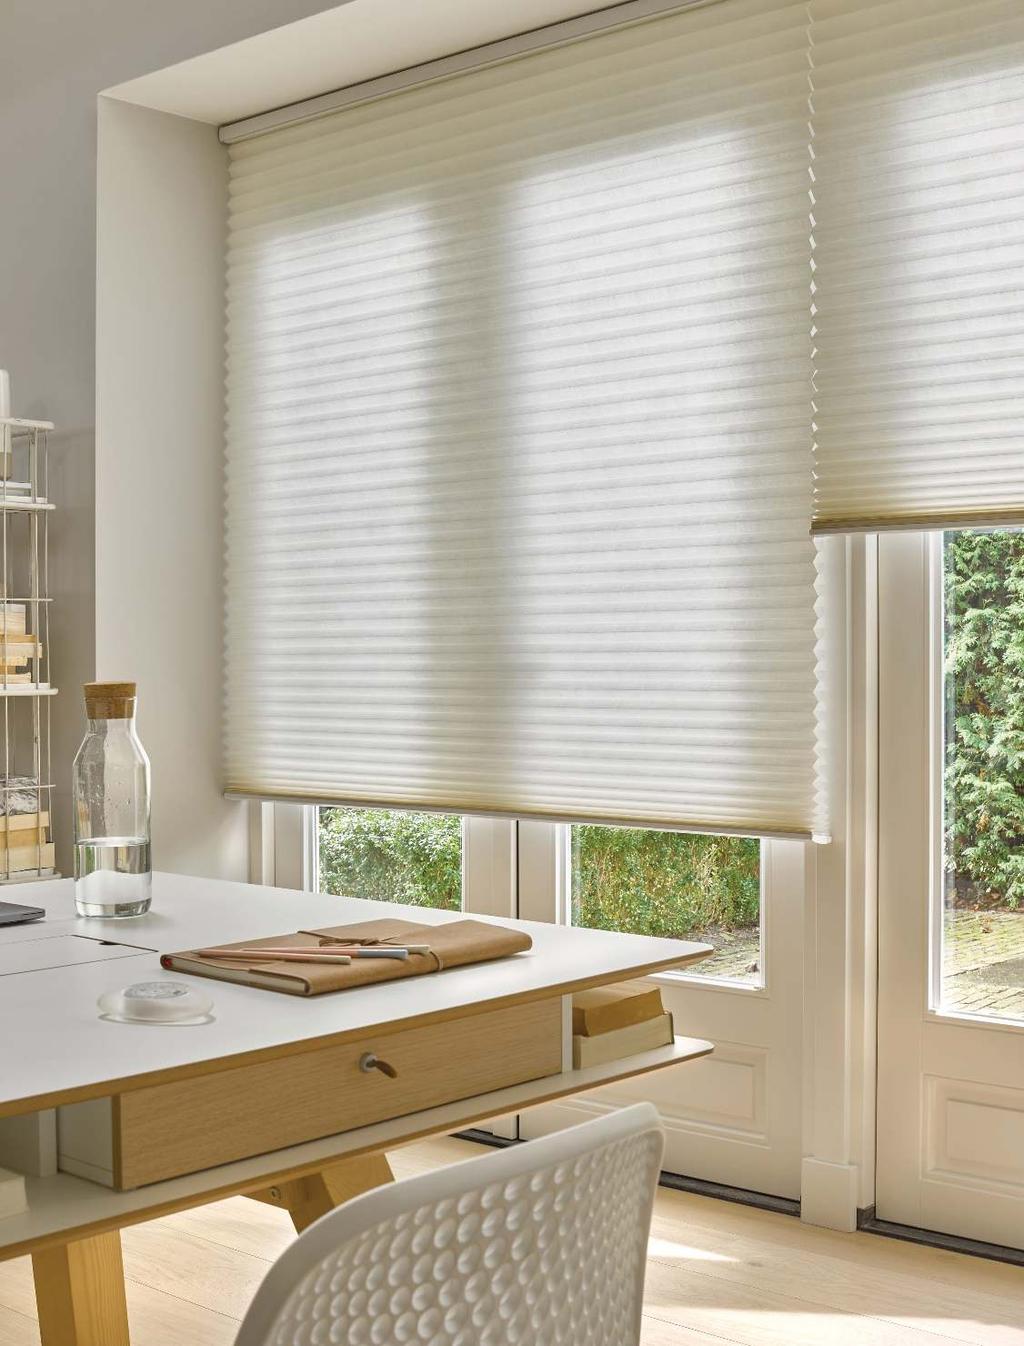 Your blinds can also be programmed to wake you gently in the